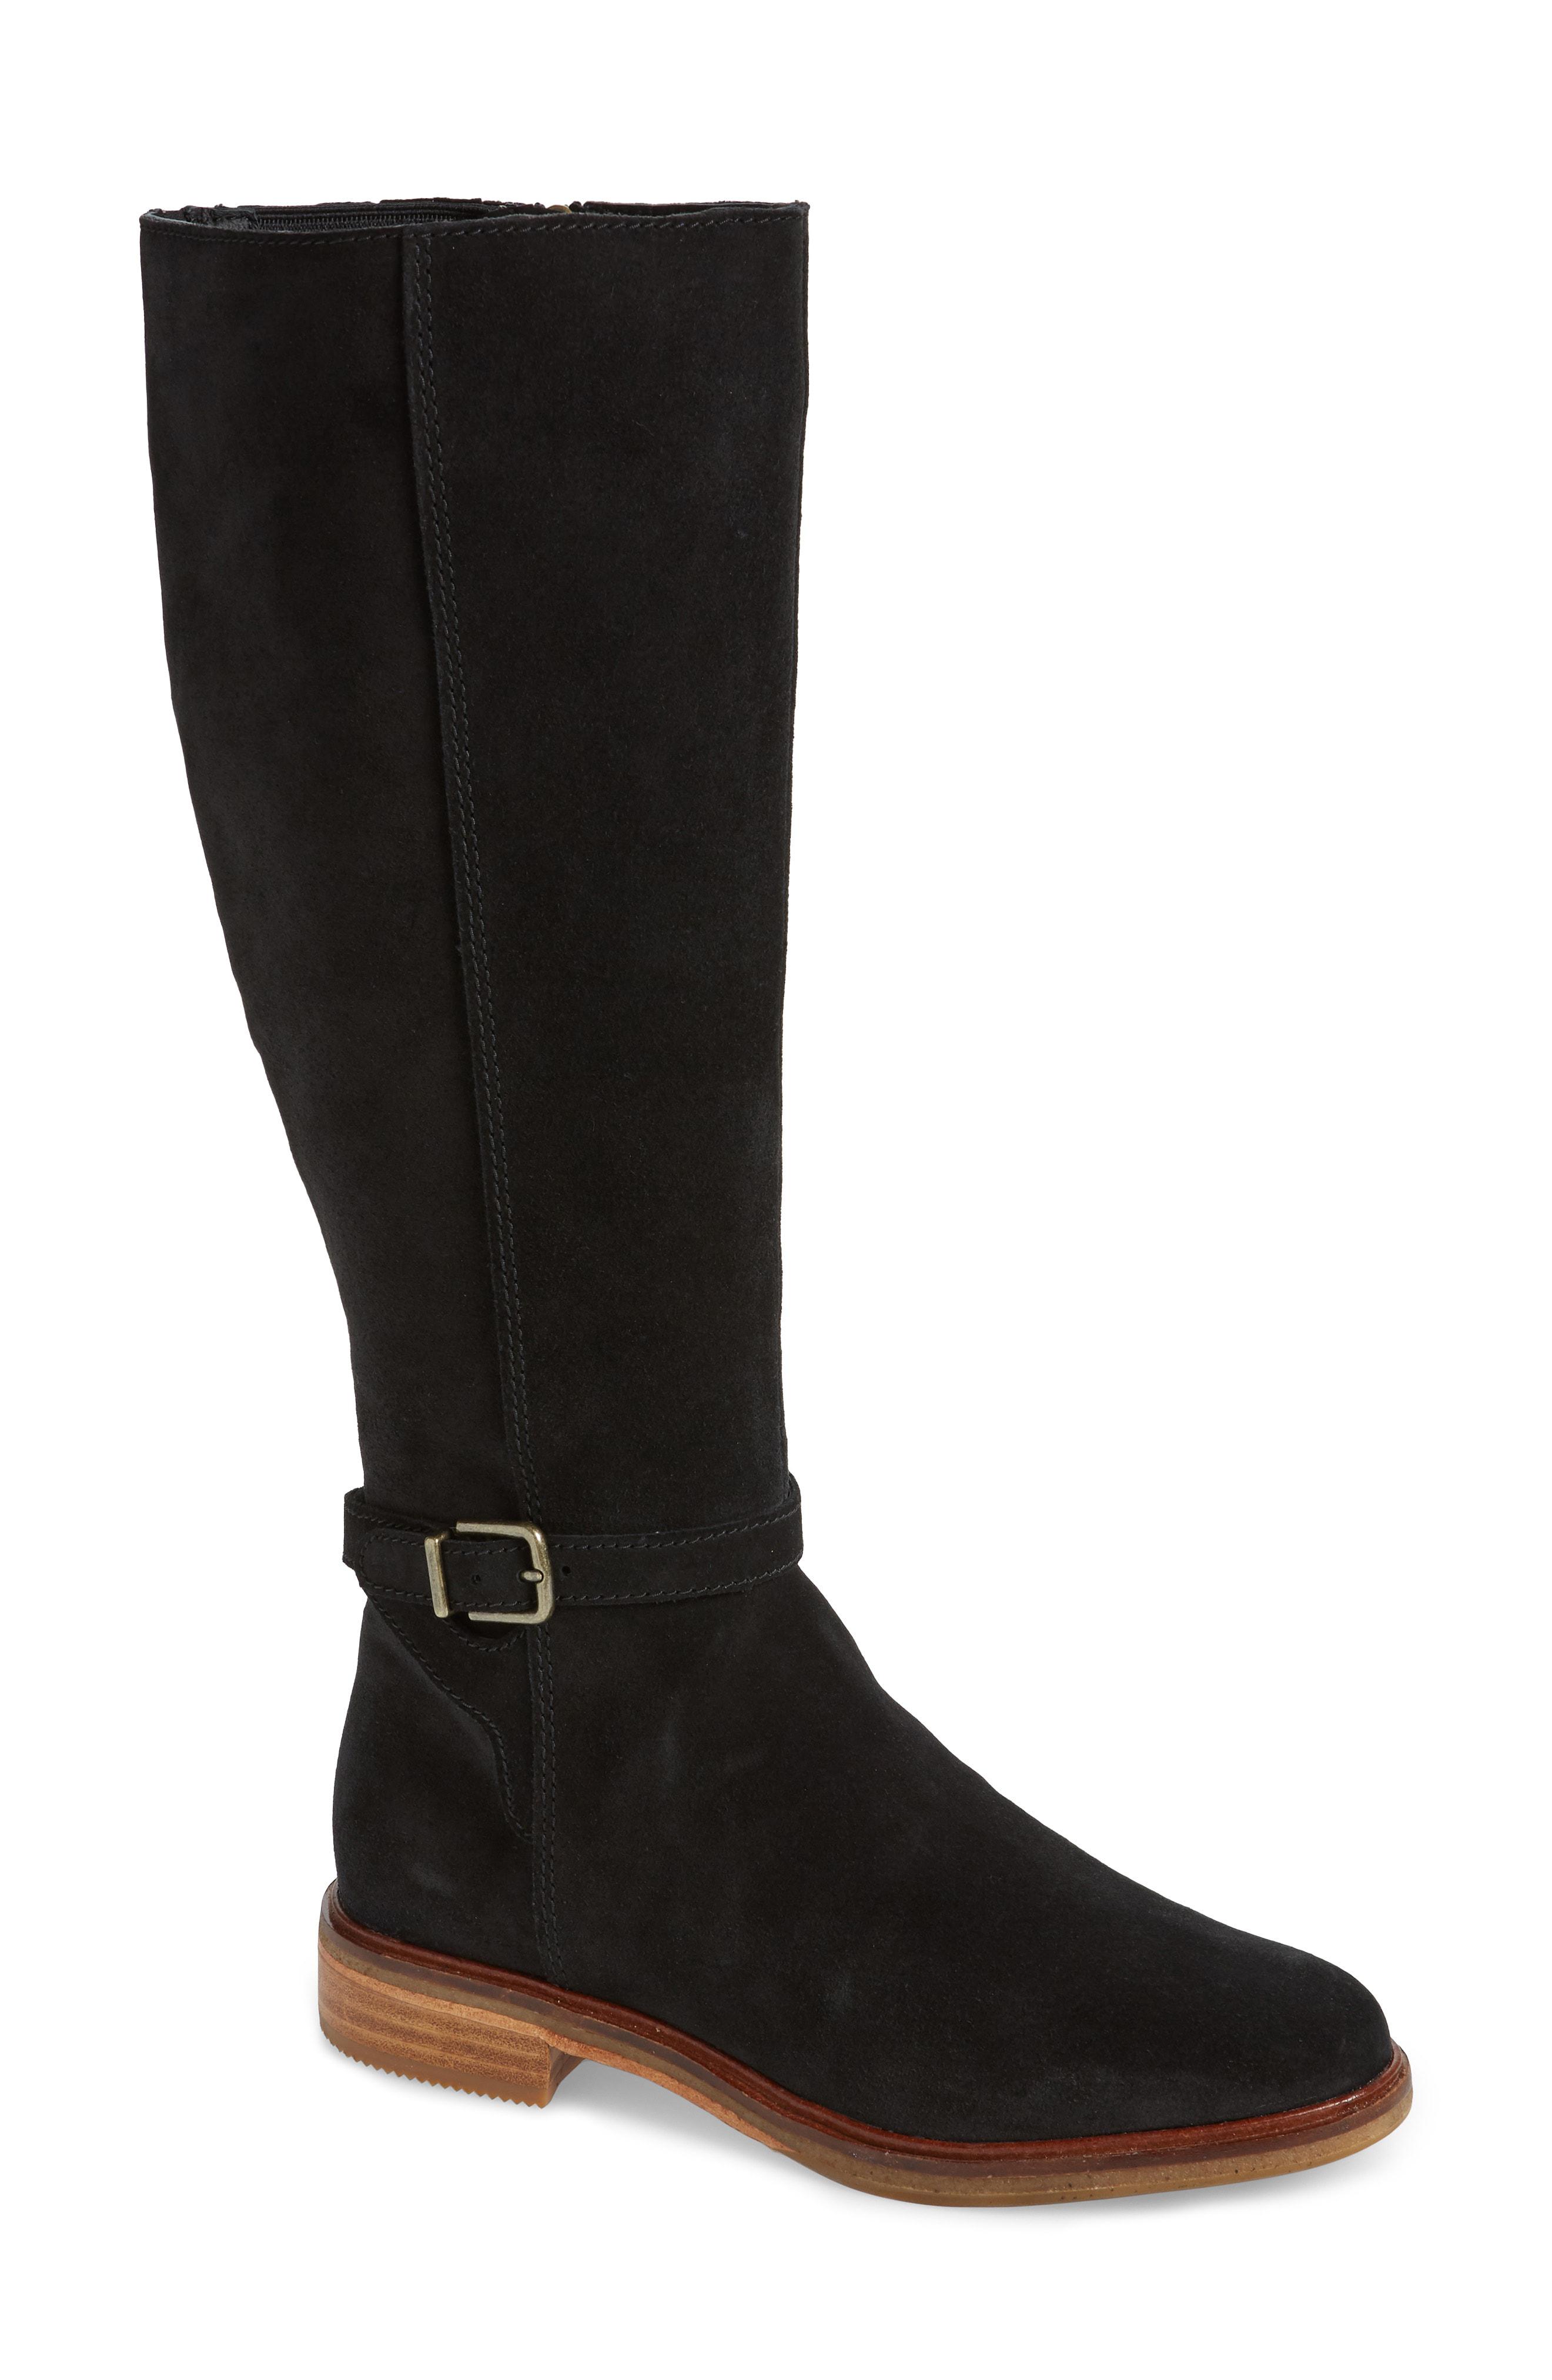 clarks clarkdale clad boot Online shopping has never been as easy!